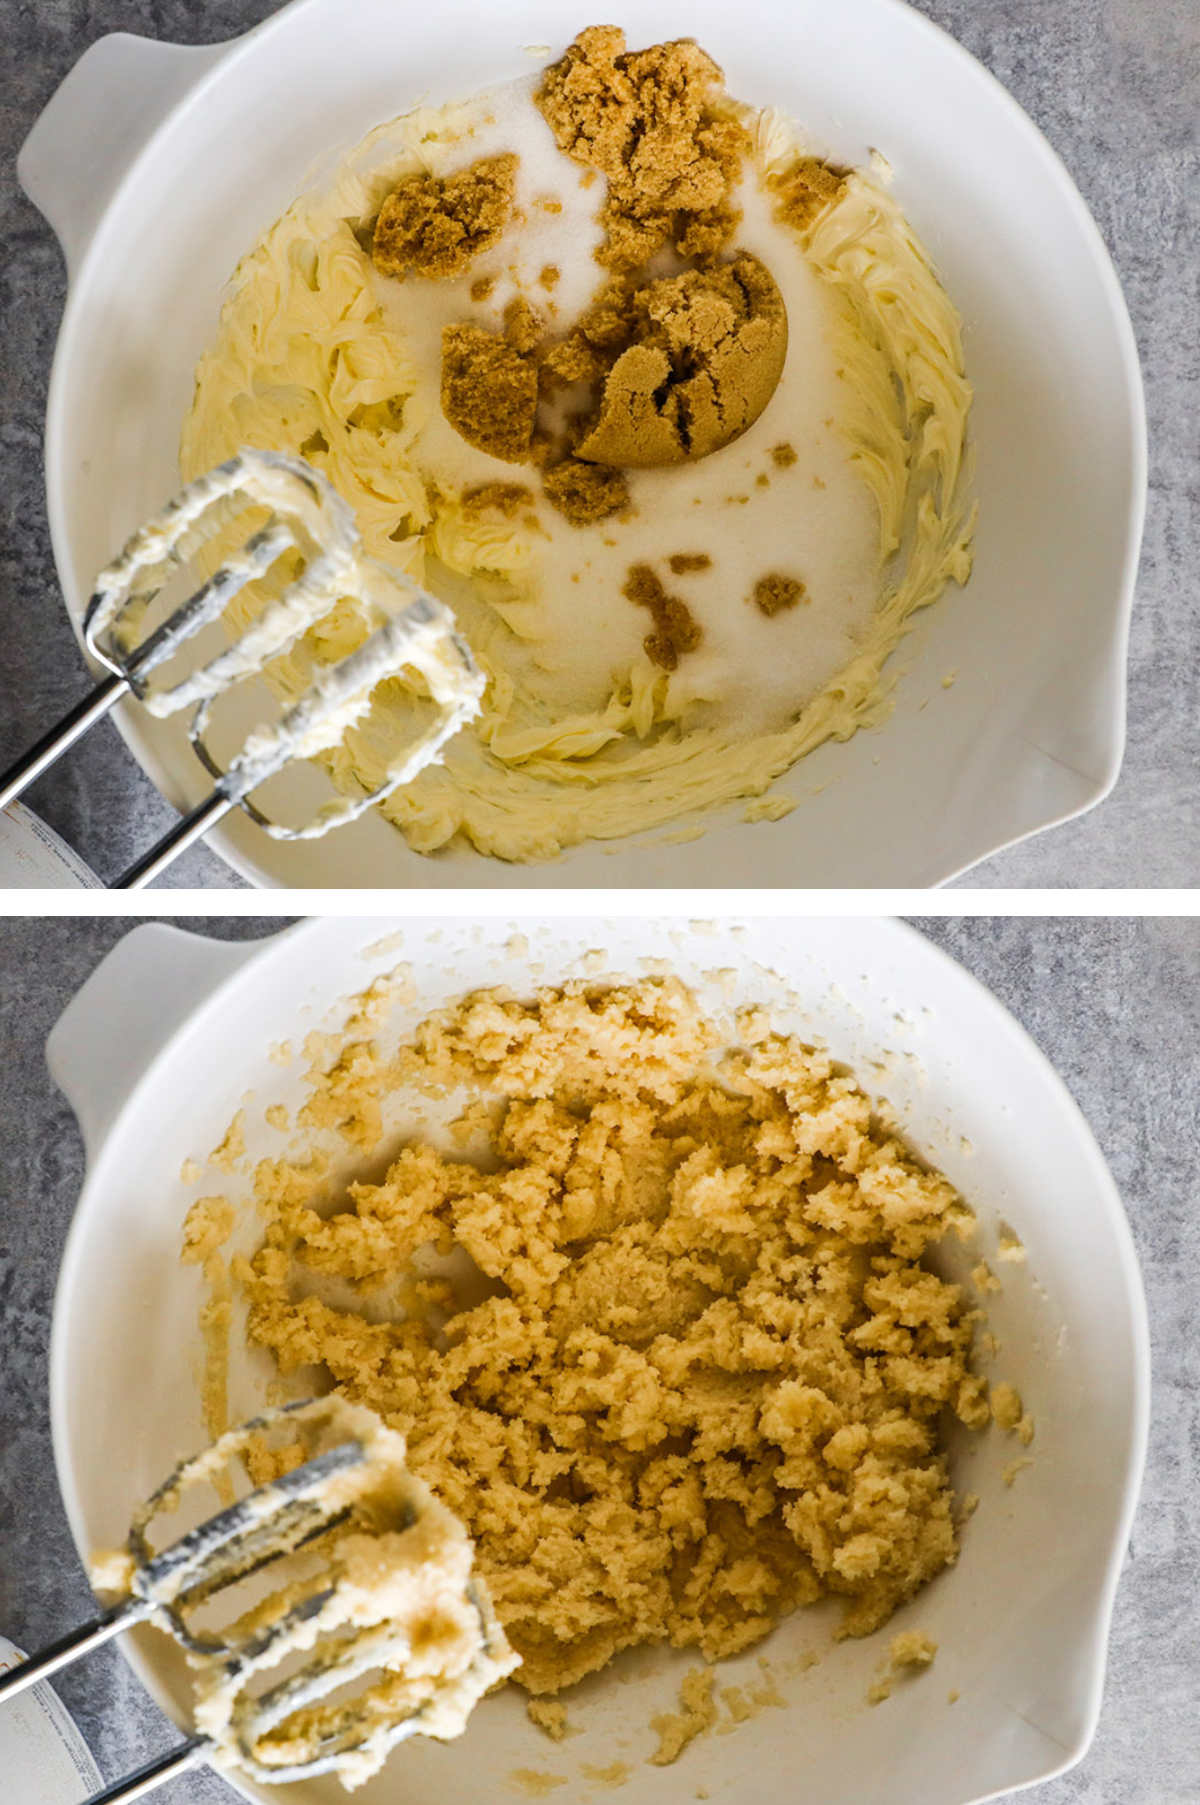 Two overhead images in one: 1. Sugar is added to butter. 2. Sugar is mixed into butter with hand mixer. 